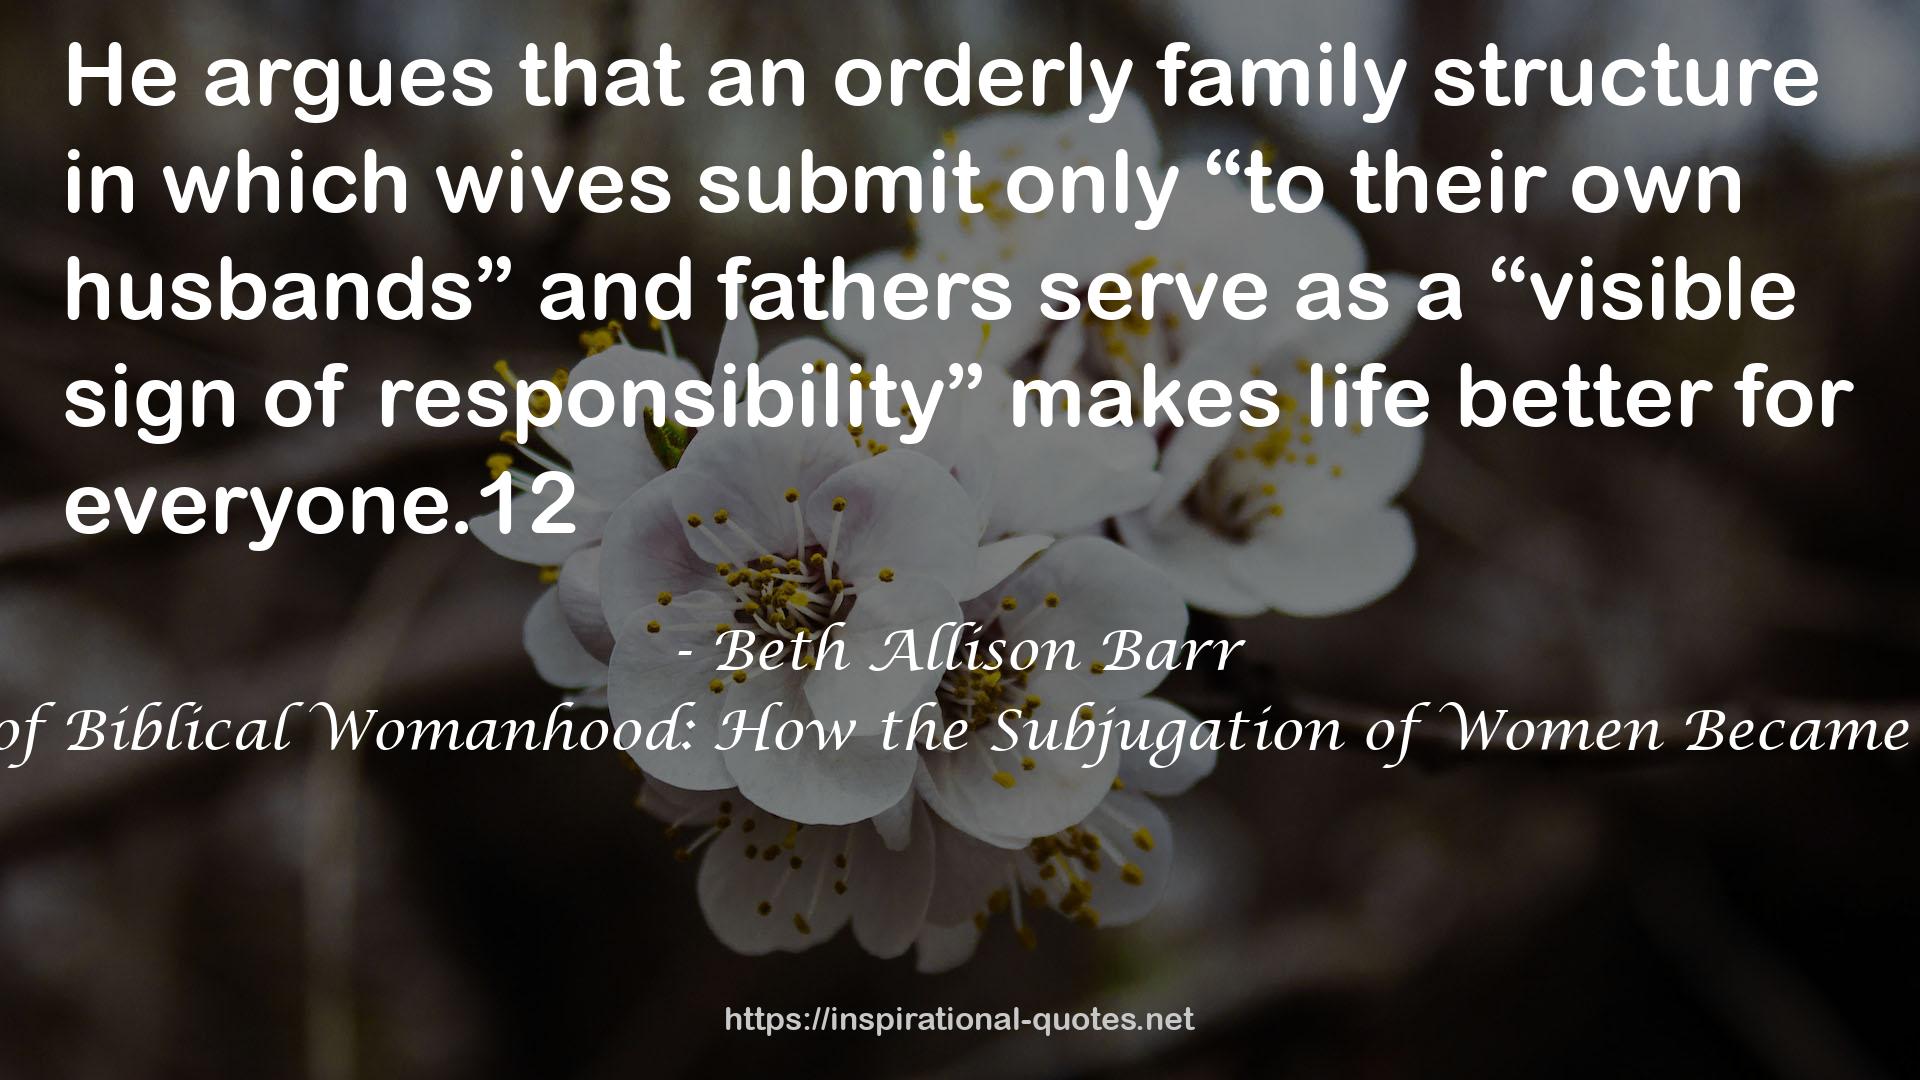 The Making of Biblical Womanhood: How the Subjugation of Women Became Gospel Truth QUOTES